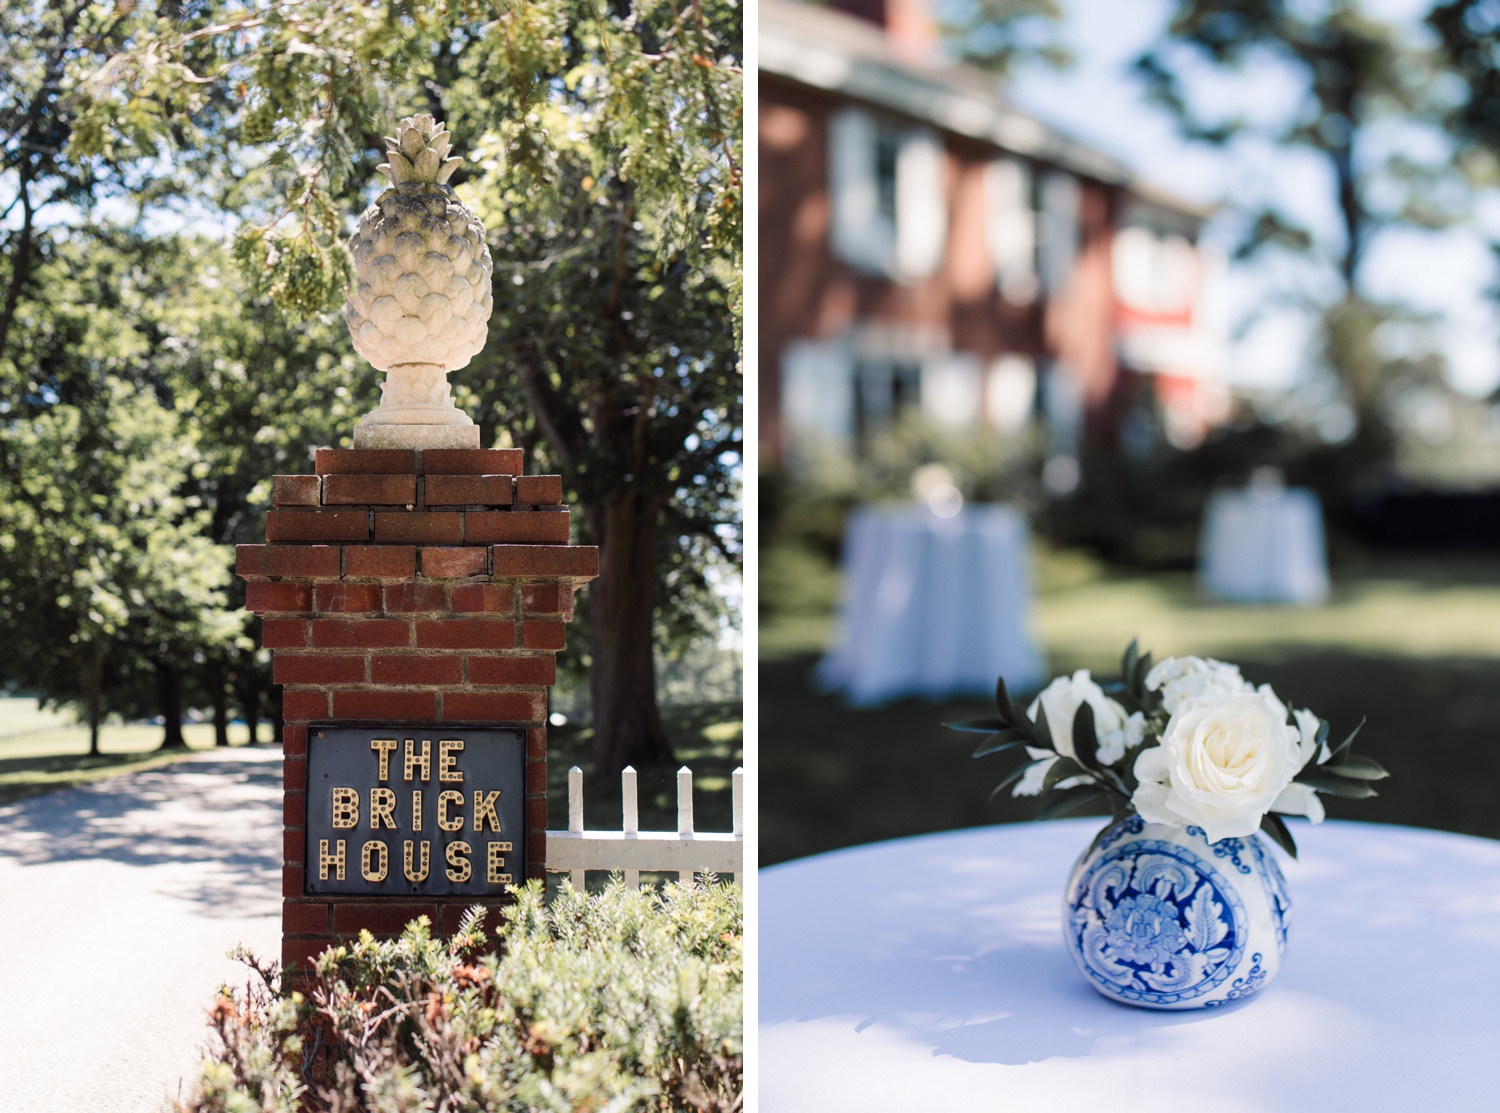 Summer wedding at The Brick House at Shelburne Museum in Vermont